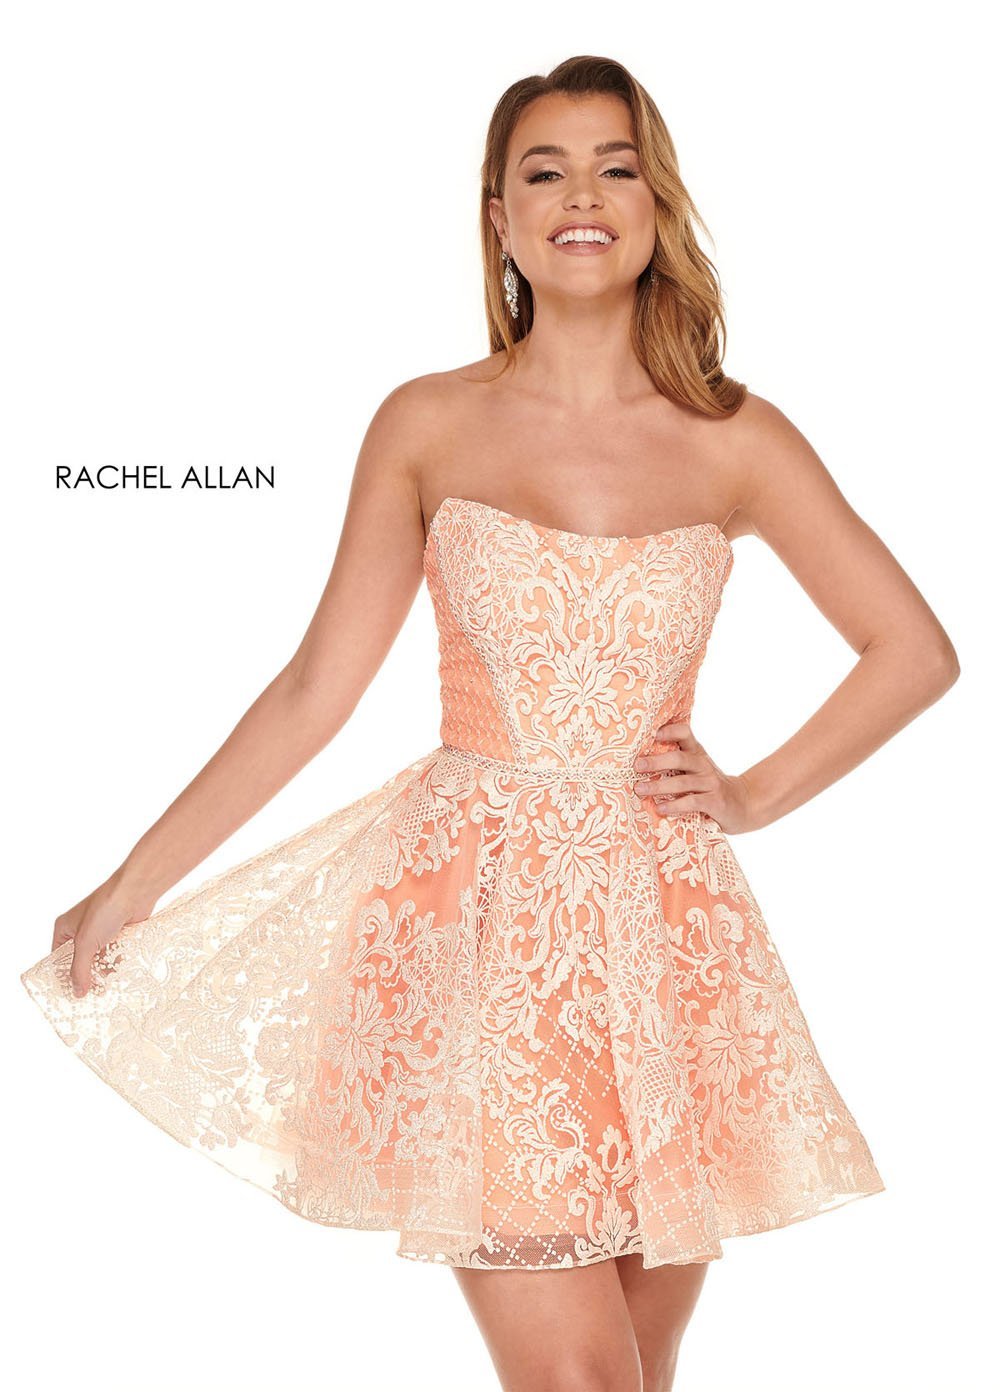 Rachel Allan 40062 dress images in these colors: White Soft Coral,White Ocean Blue.